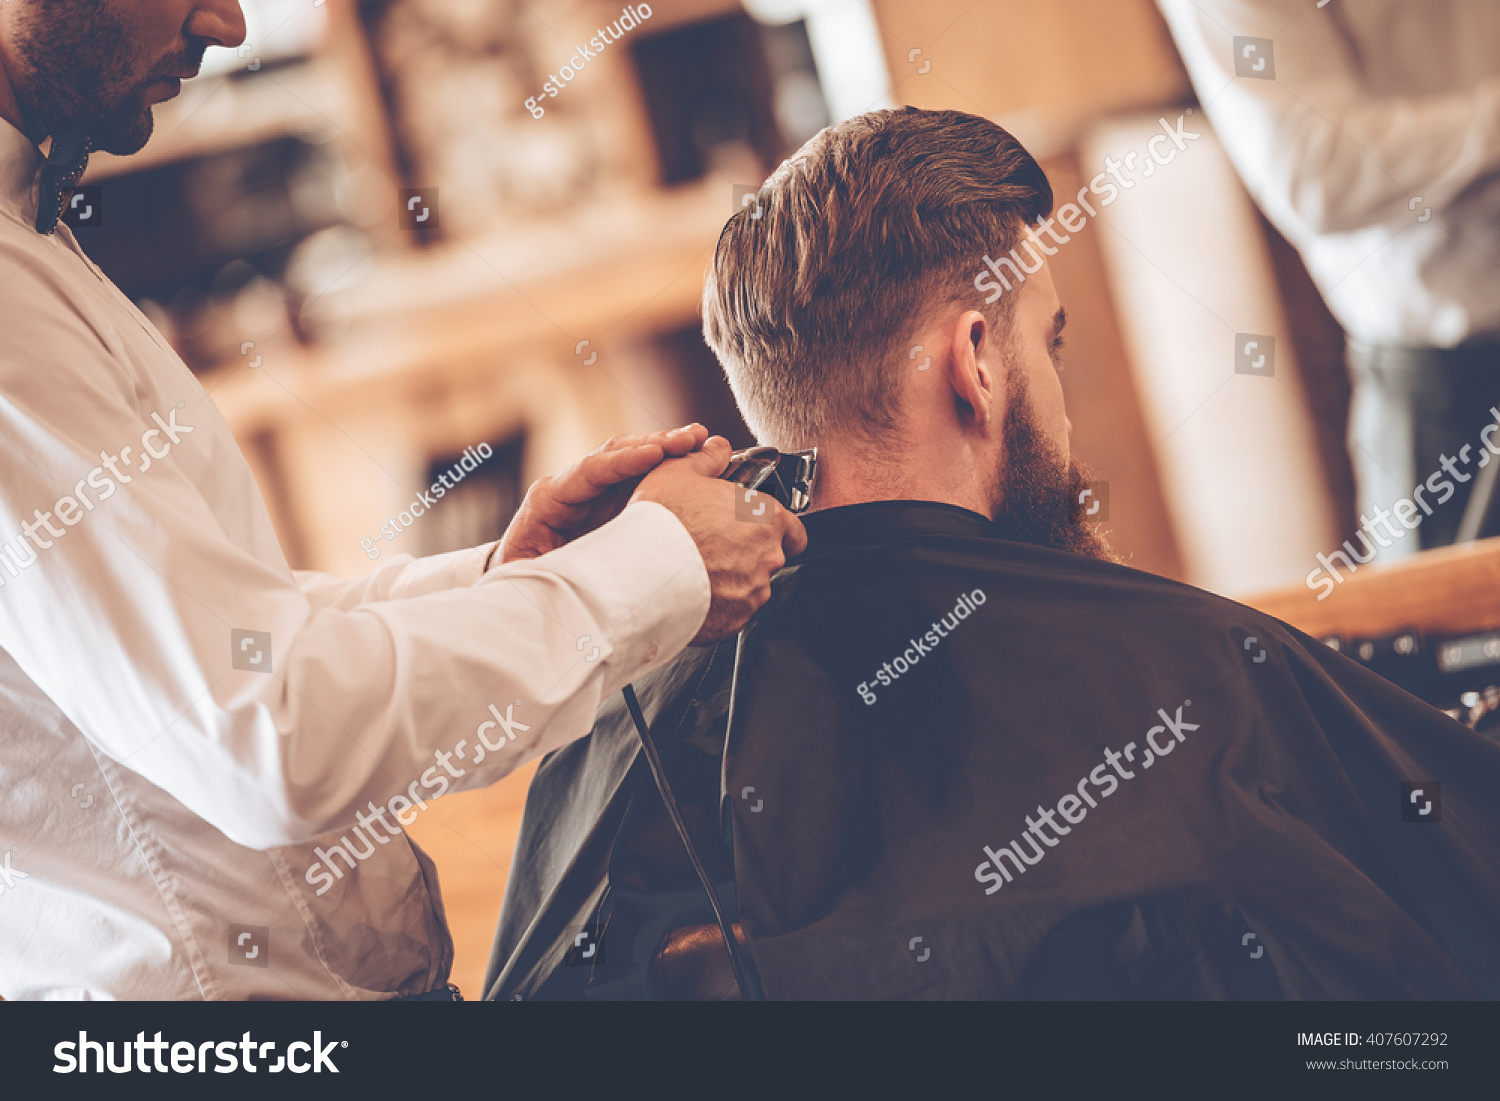 Perfect  trim. Rear view close-up of young bearded man getting haircut by hairdresser with electric razor while sitting in chair at barbershop #407607292